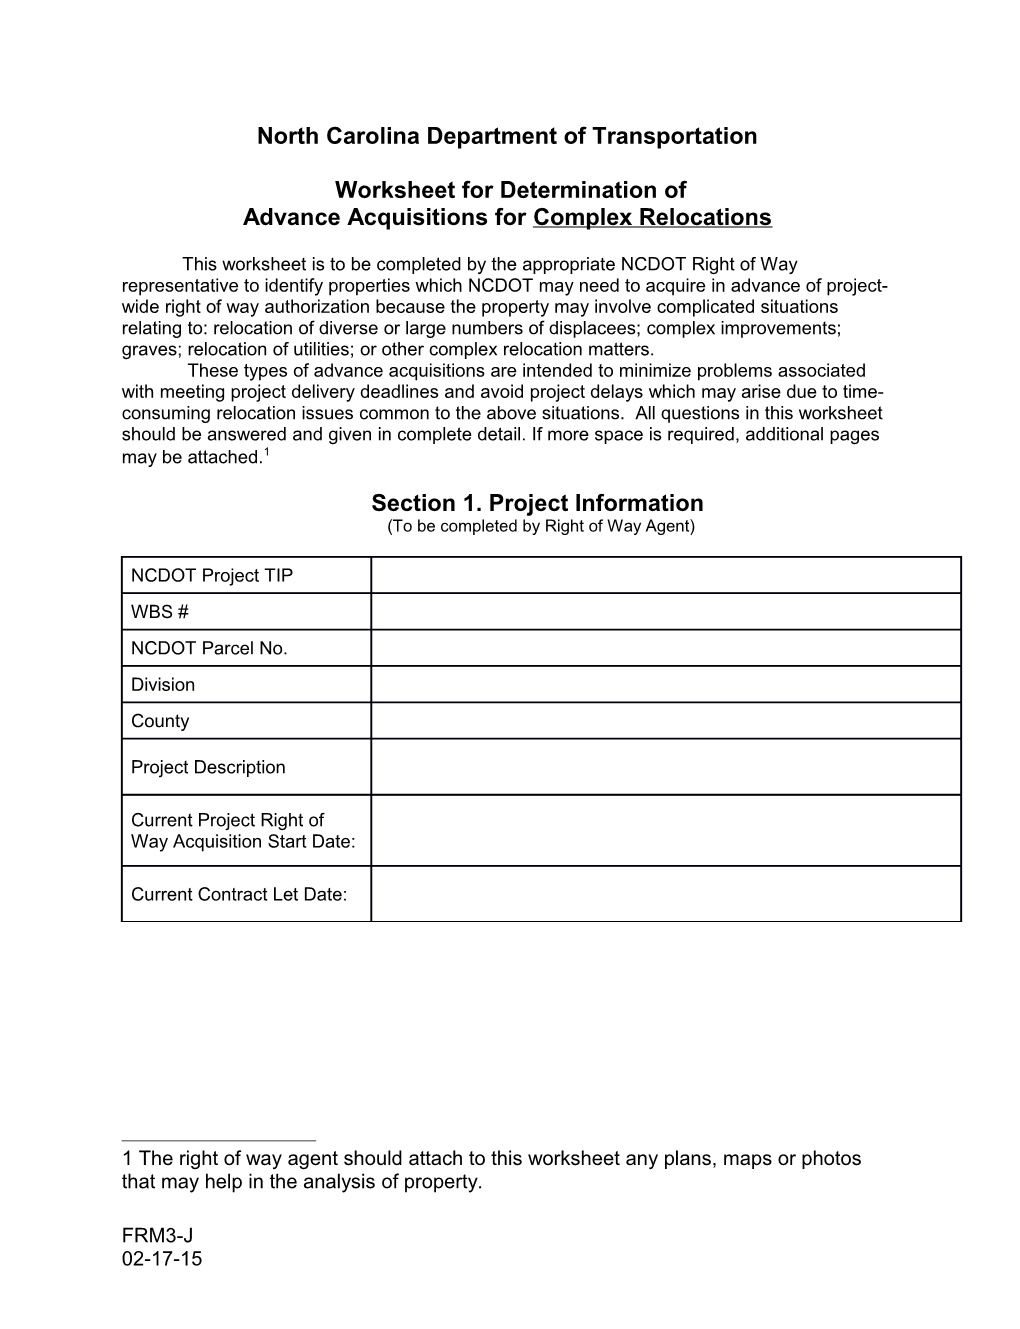 Worksheet for Determination of Advance Acquisition for Complex Relocations